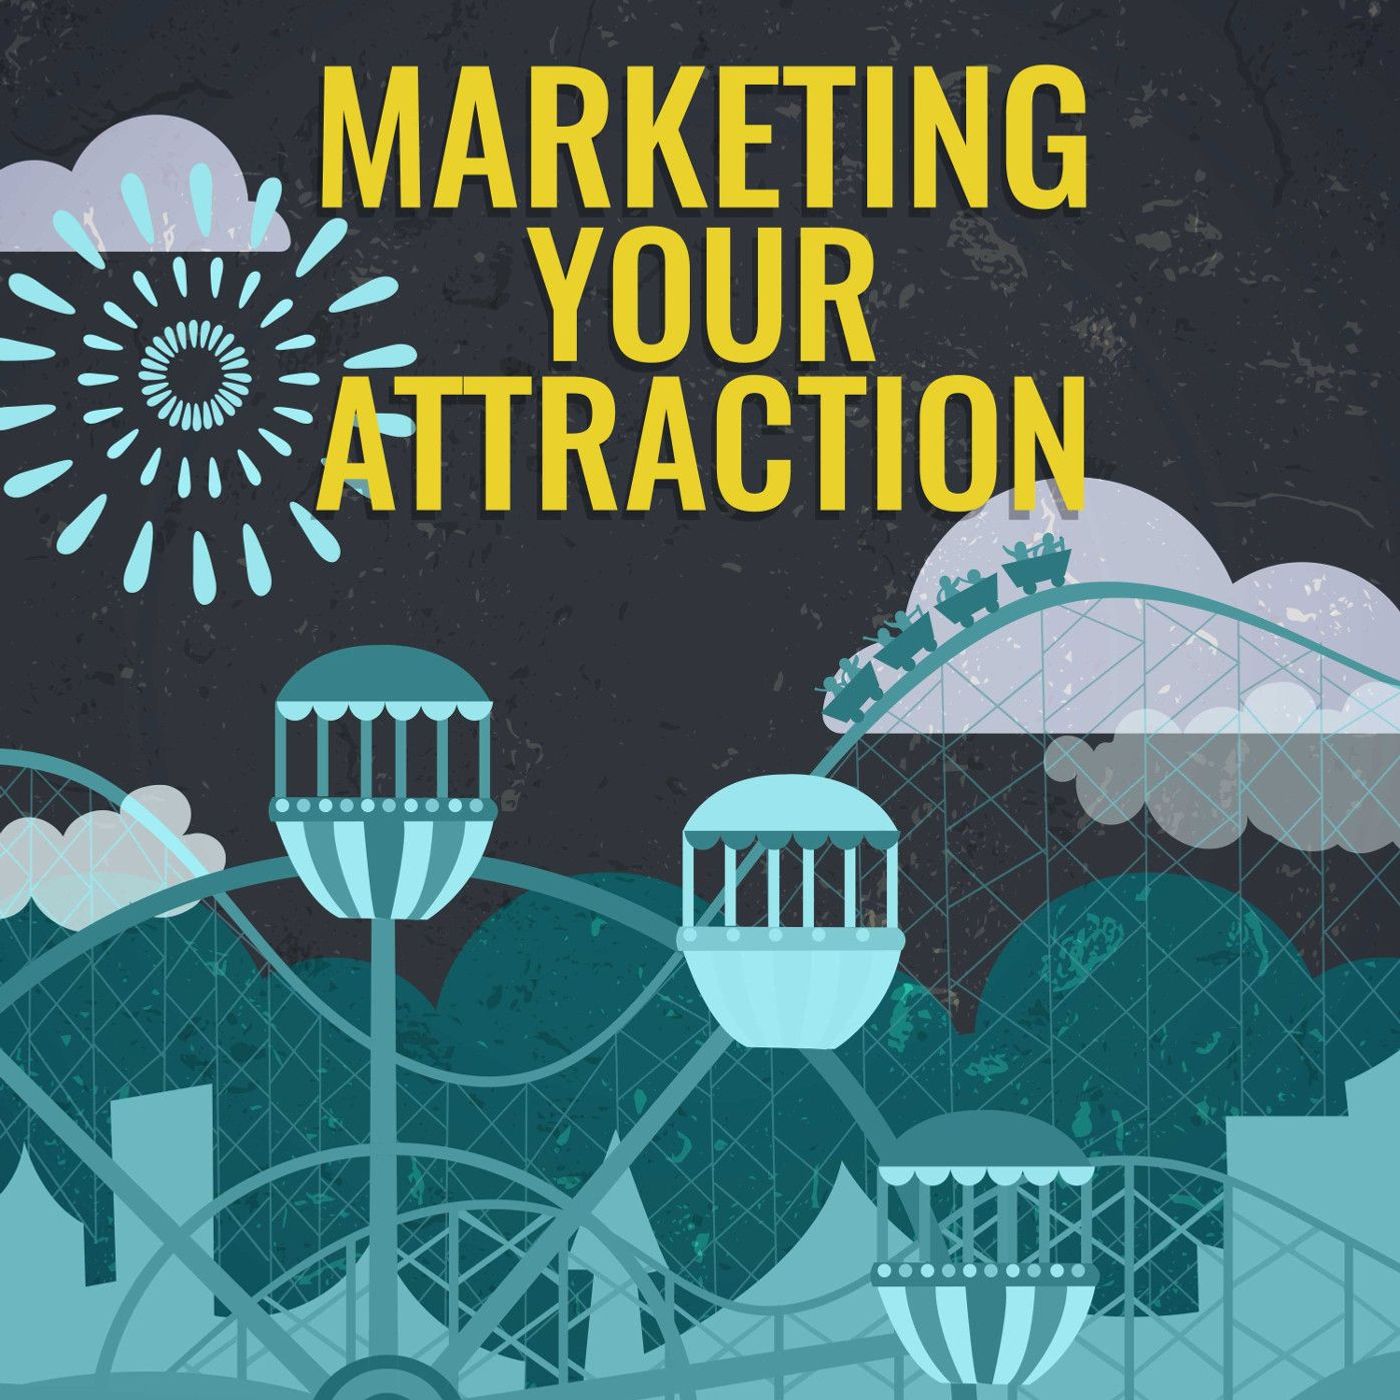 Your Guide to Working With Marketing Agencies